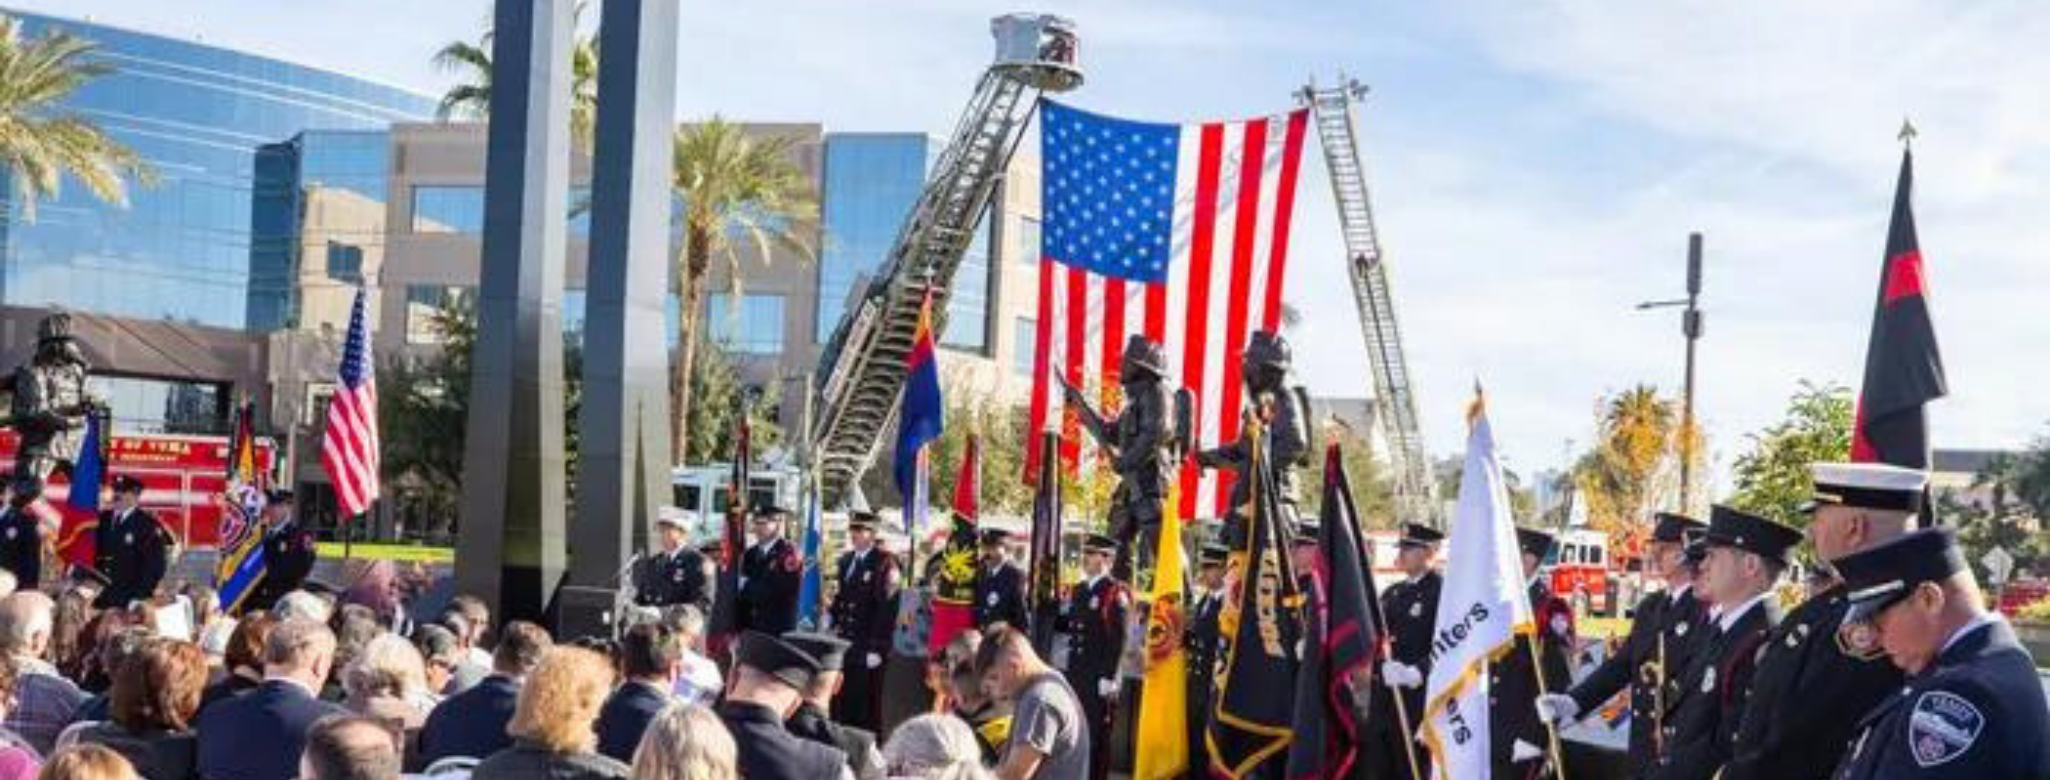 Remembering Heroes: Ways to Honor Fallen Firefighters on National Fallen Firefighters Day 